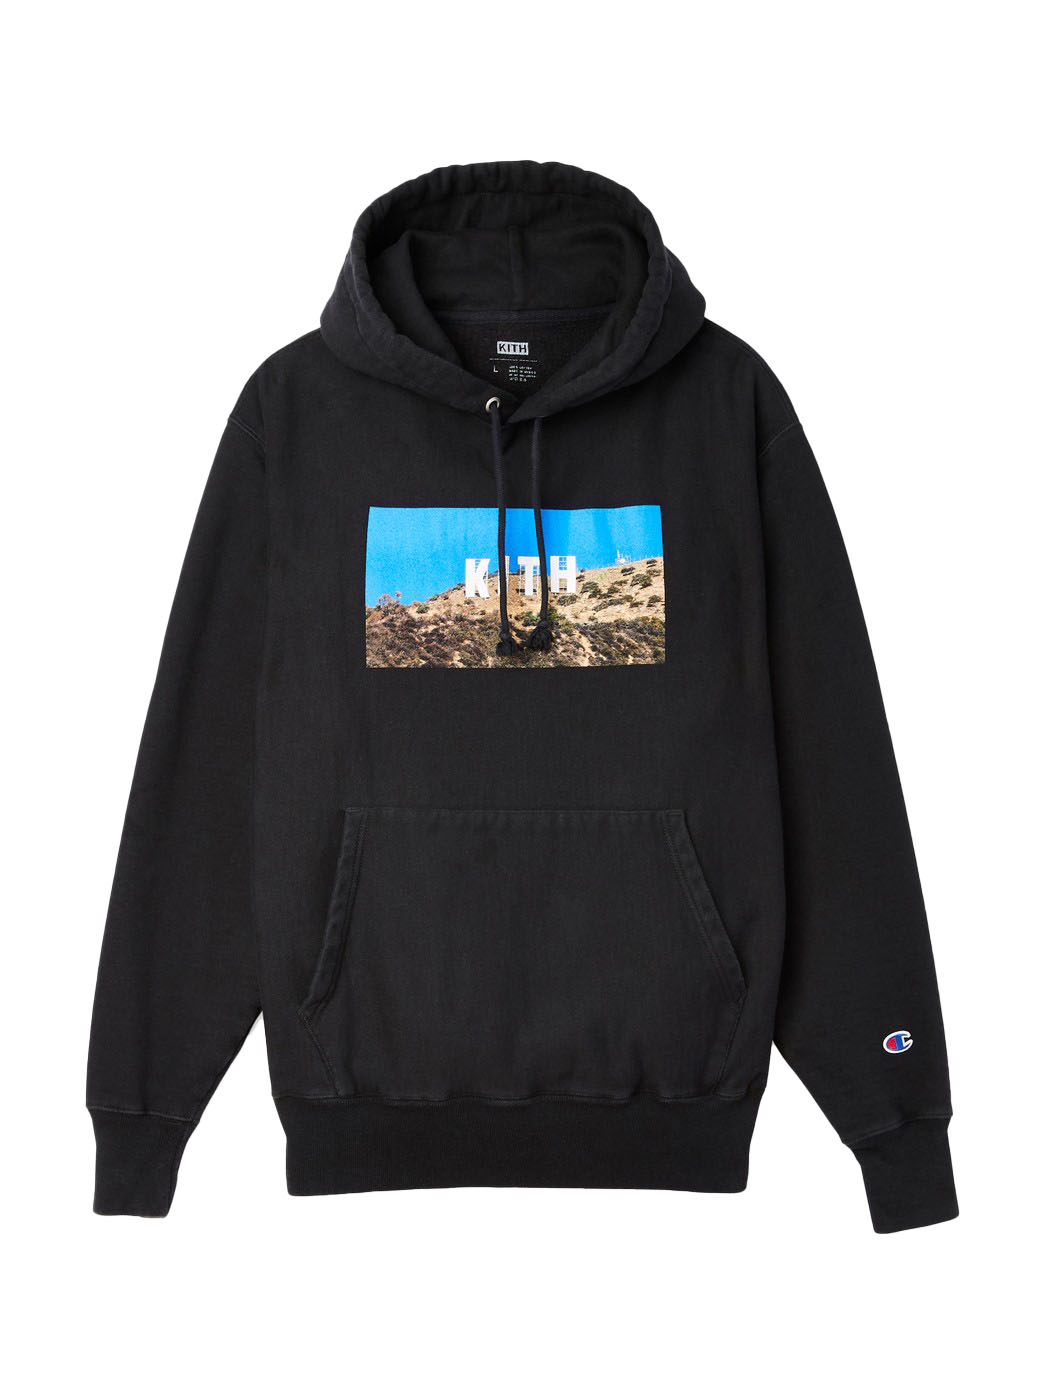 L kith LA opening hoody hollywood sign-